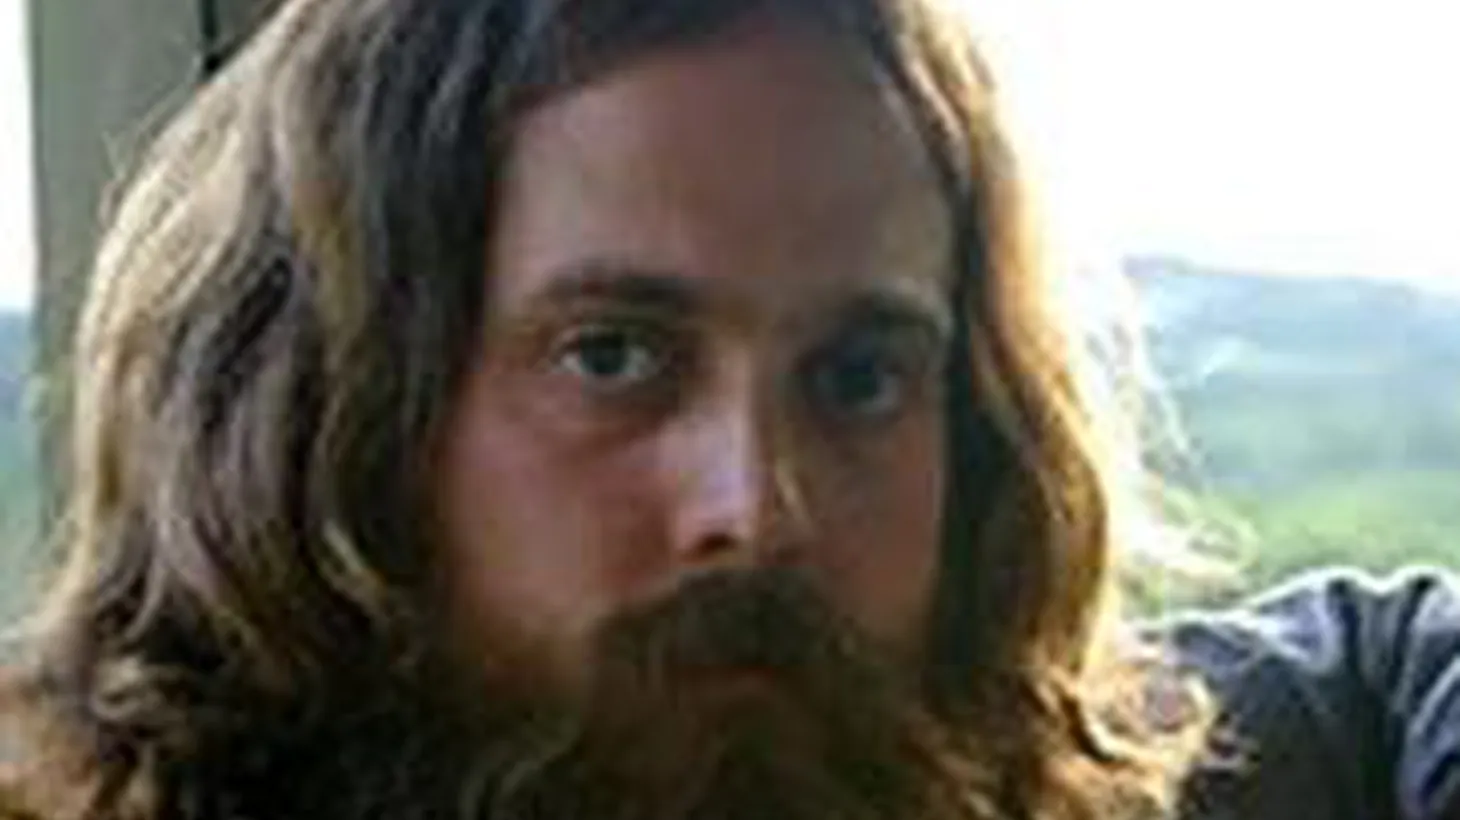 Sam Beam, better known as Iron and Wine returns to perform solo and acoustic on Morning Becomes Eclectic at 11:15am.